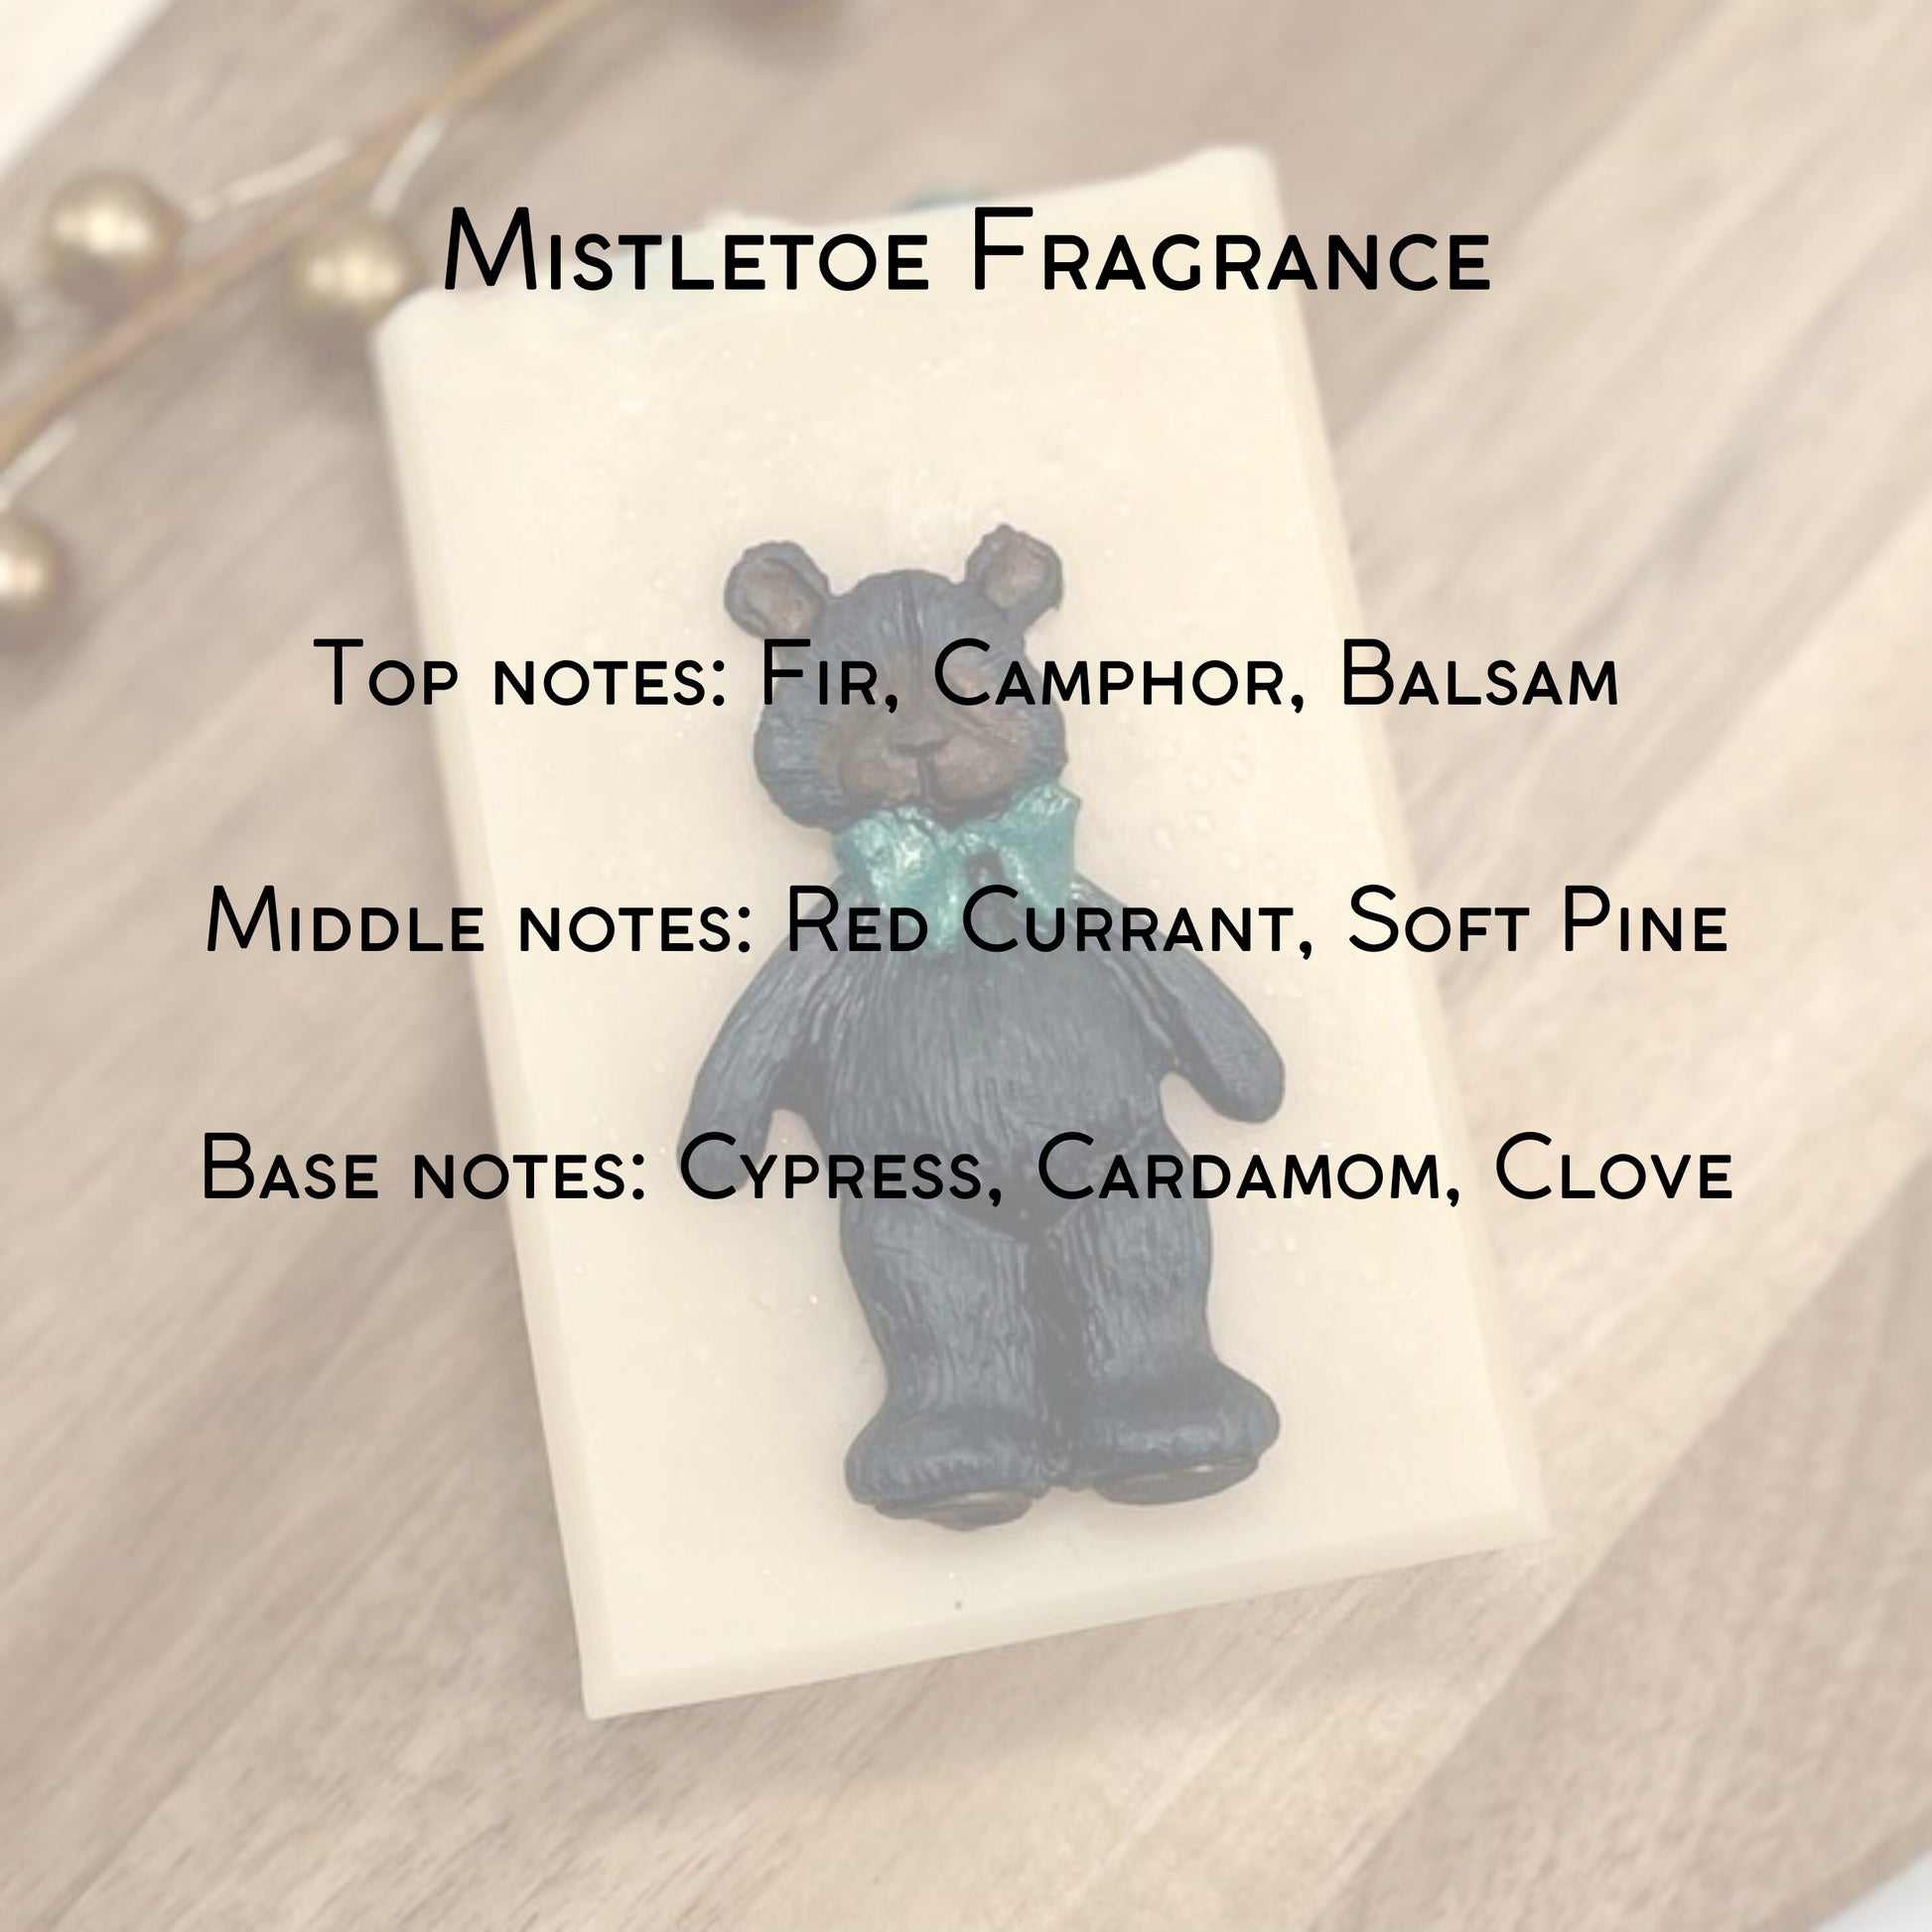 graphic for fragrance notes. top notes fir, camphor, balsam. middle notes red currant, soft pine. base notes cypress, cardamom, clove.